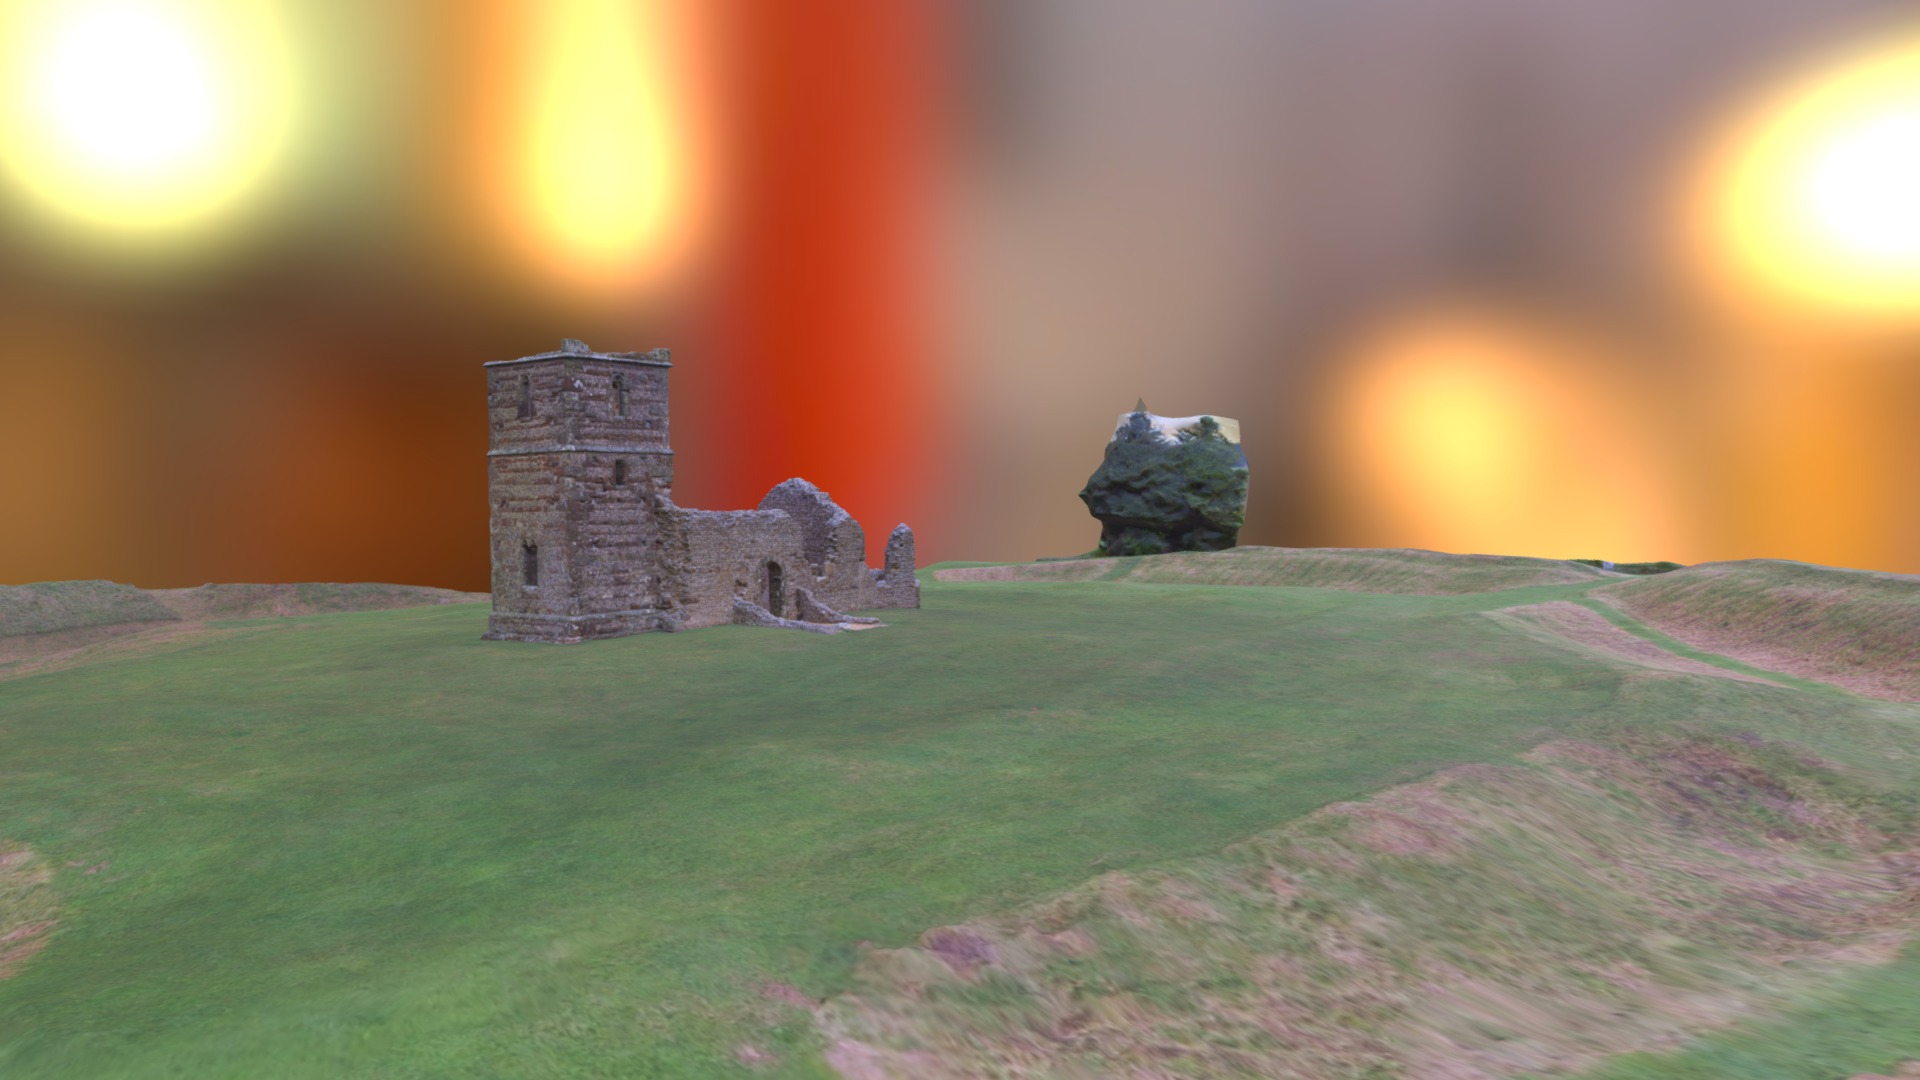 3D model knowlton church - This is a 3D model of the knowlton church. The 3D model is about a stone castle on a hill.